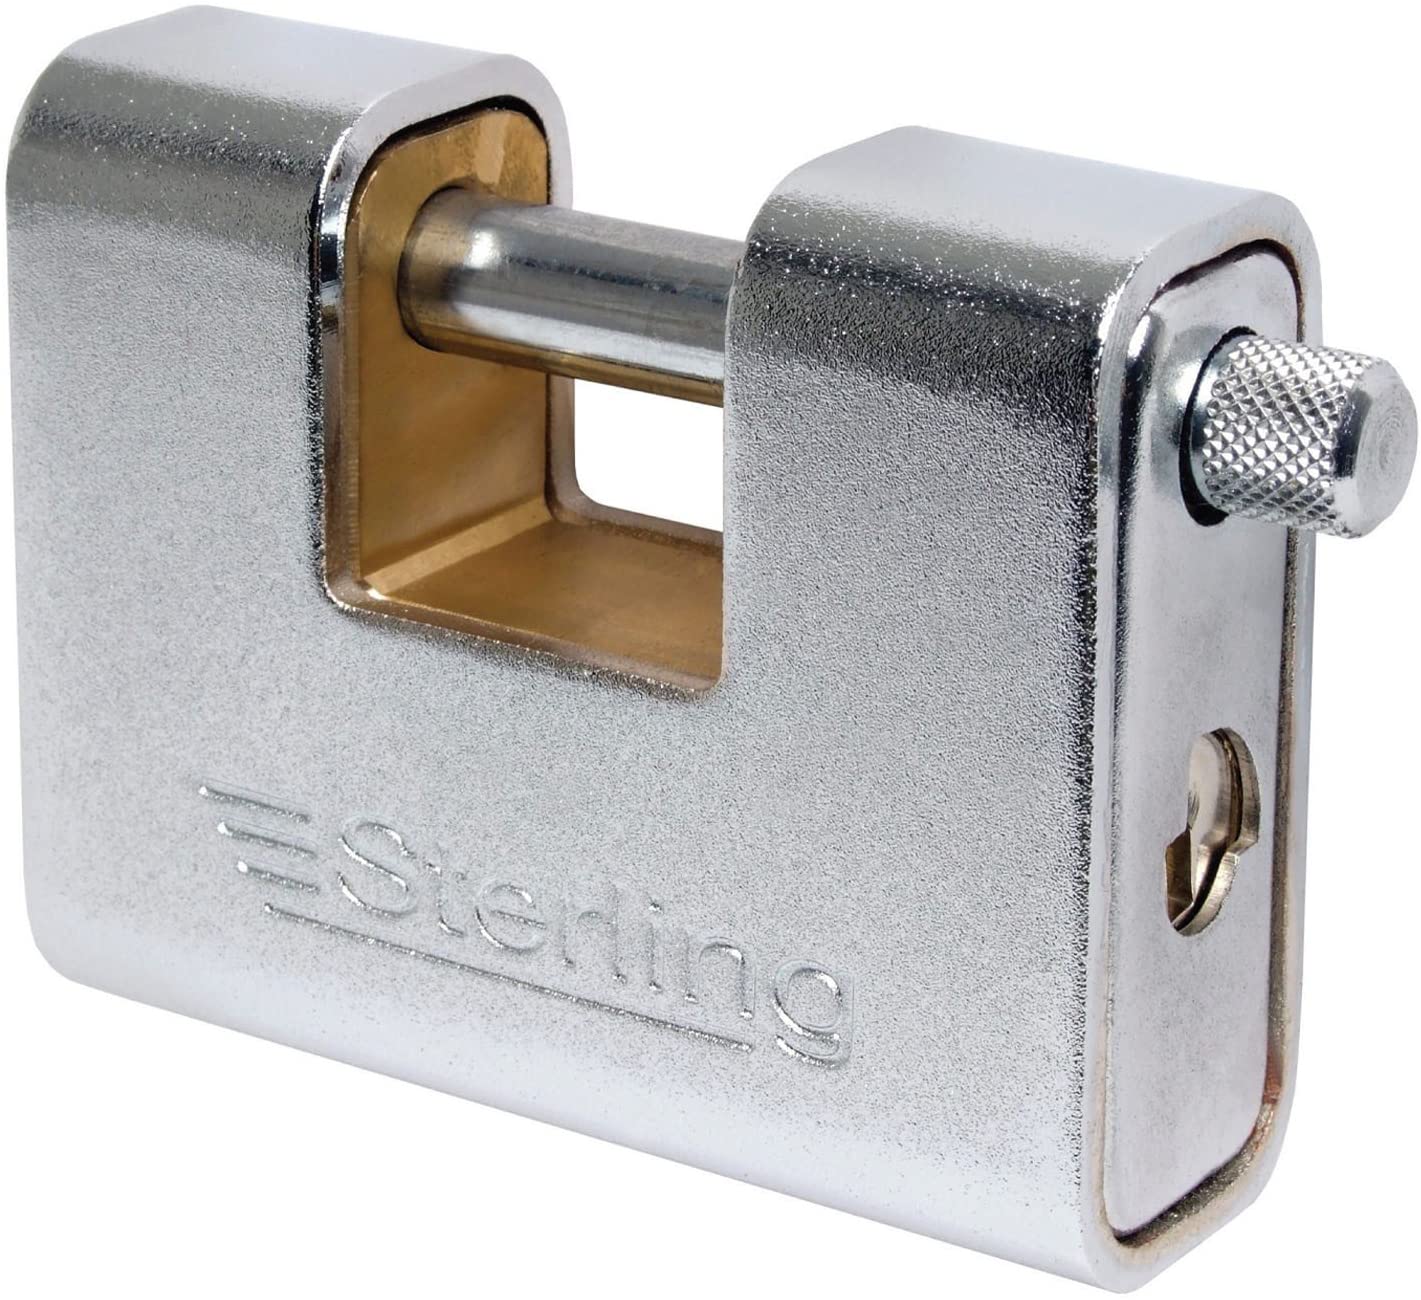 Sterling ASP160 Armoured Steel Shutter Padlock - Anti-drill cylinder